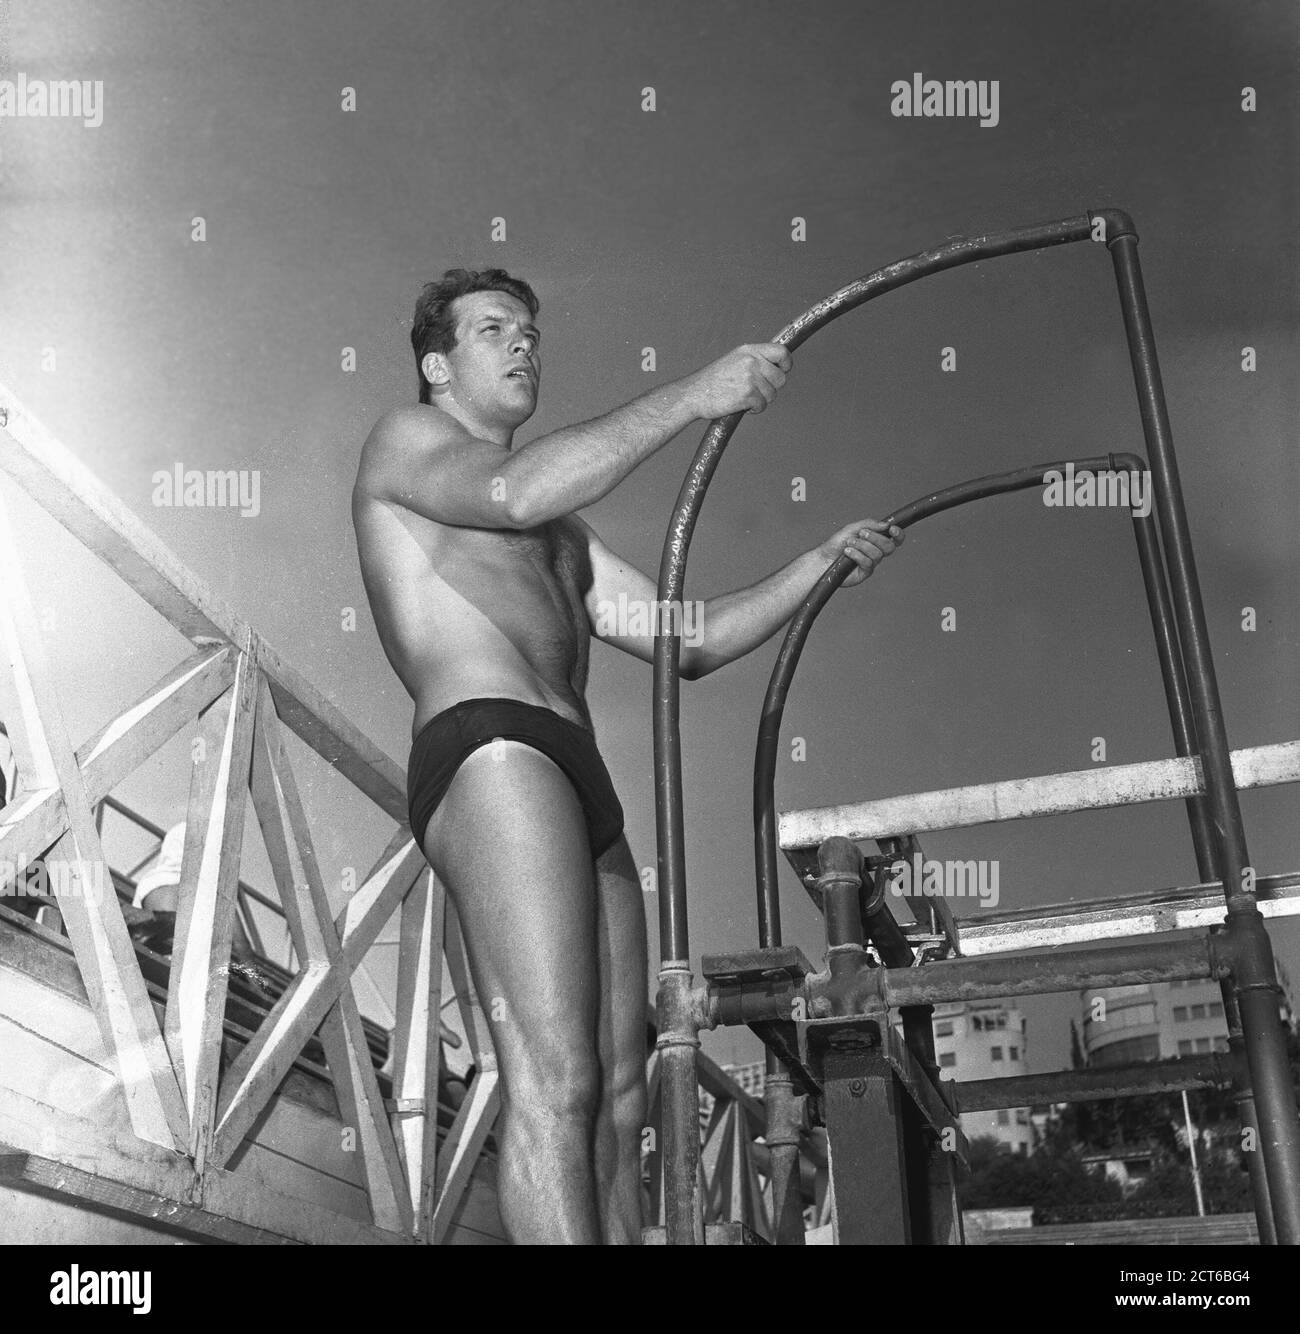 Carlo Pedersoli, alias Bud Spencer, training at the Lido for the Olympic  Games, Bergamo, 2 july 1952 Stock Photo - Alamy